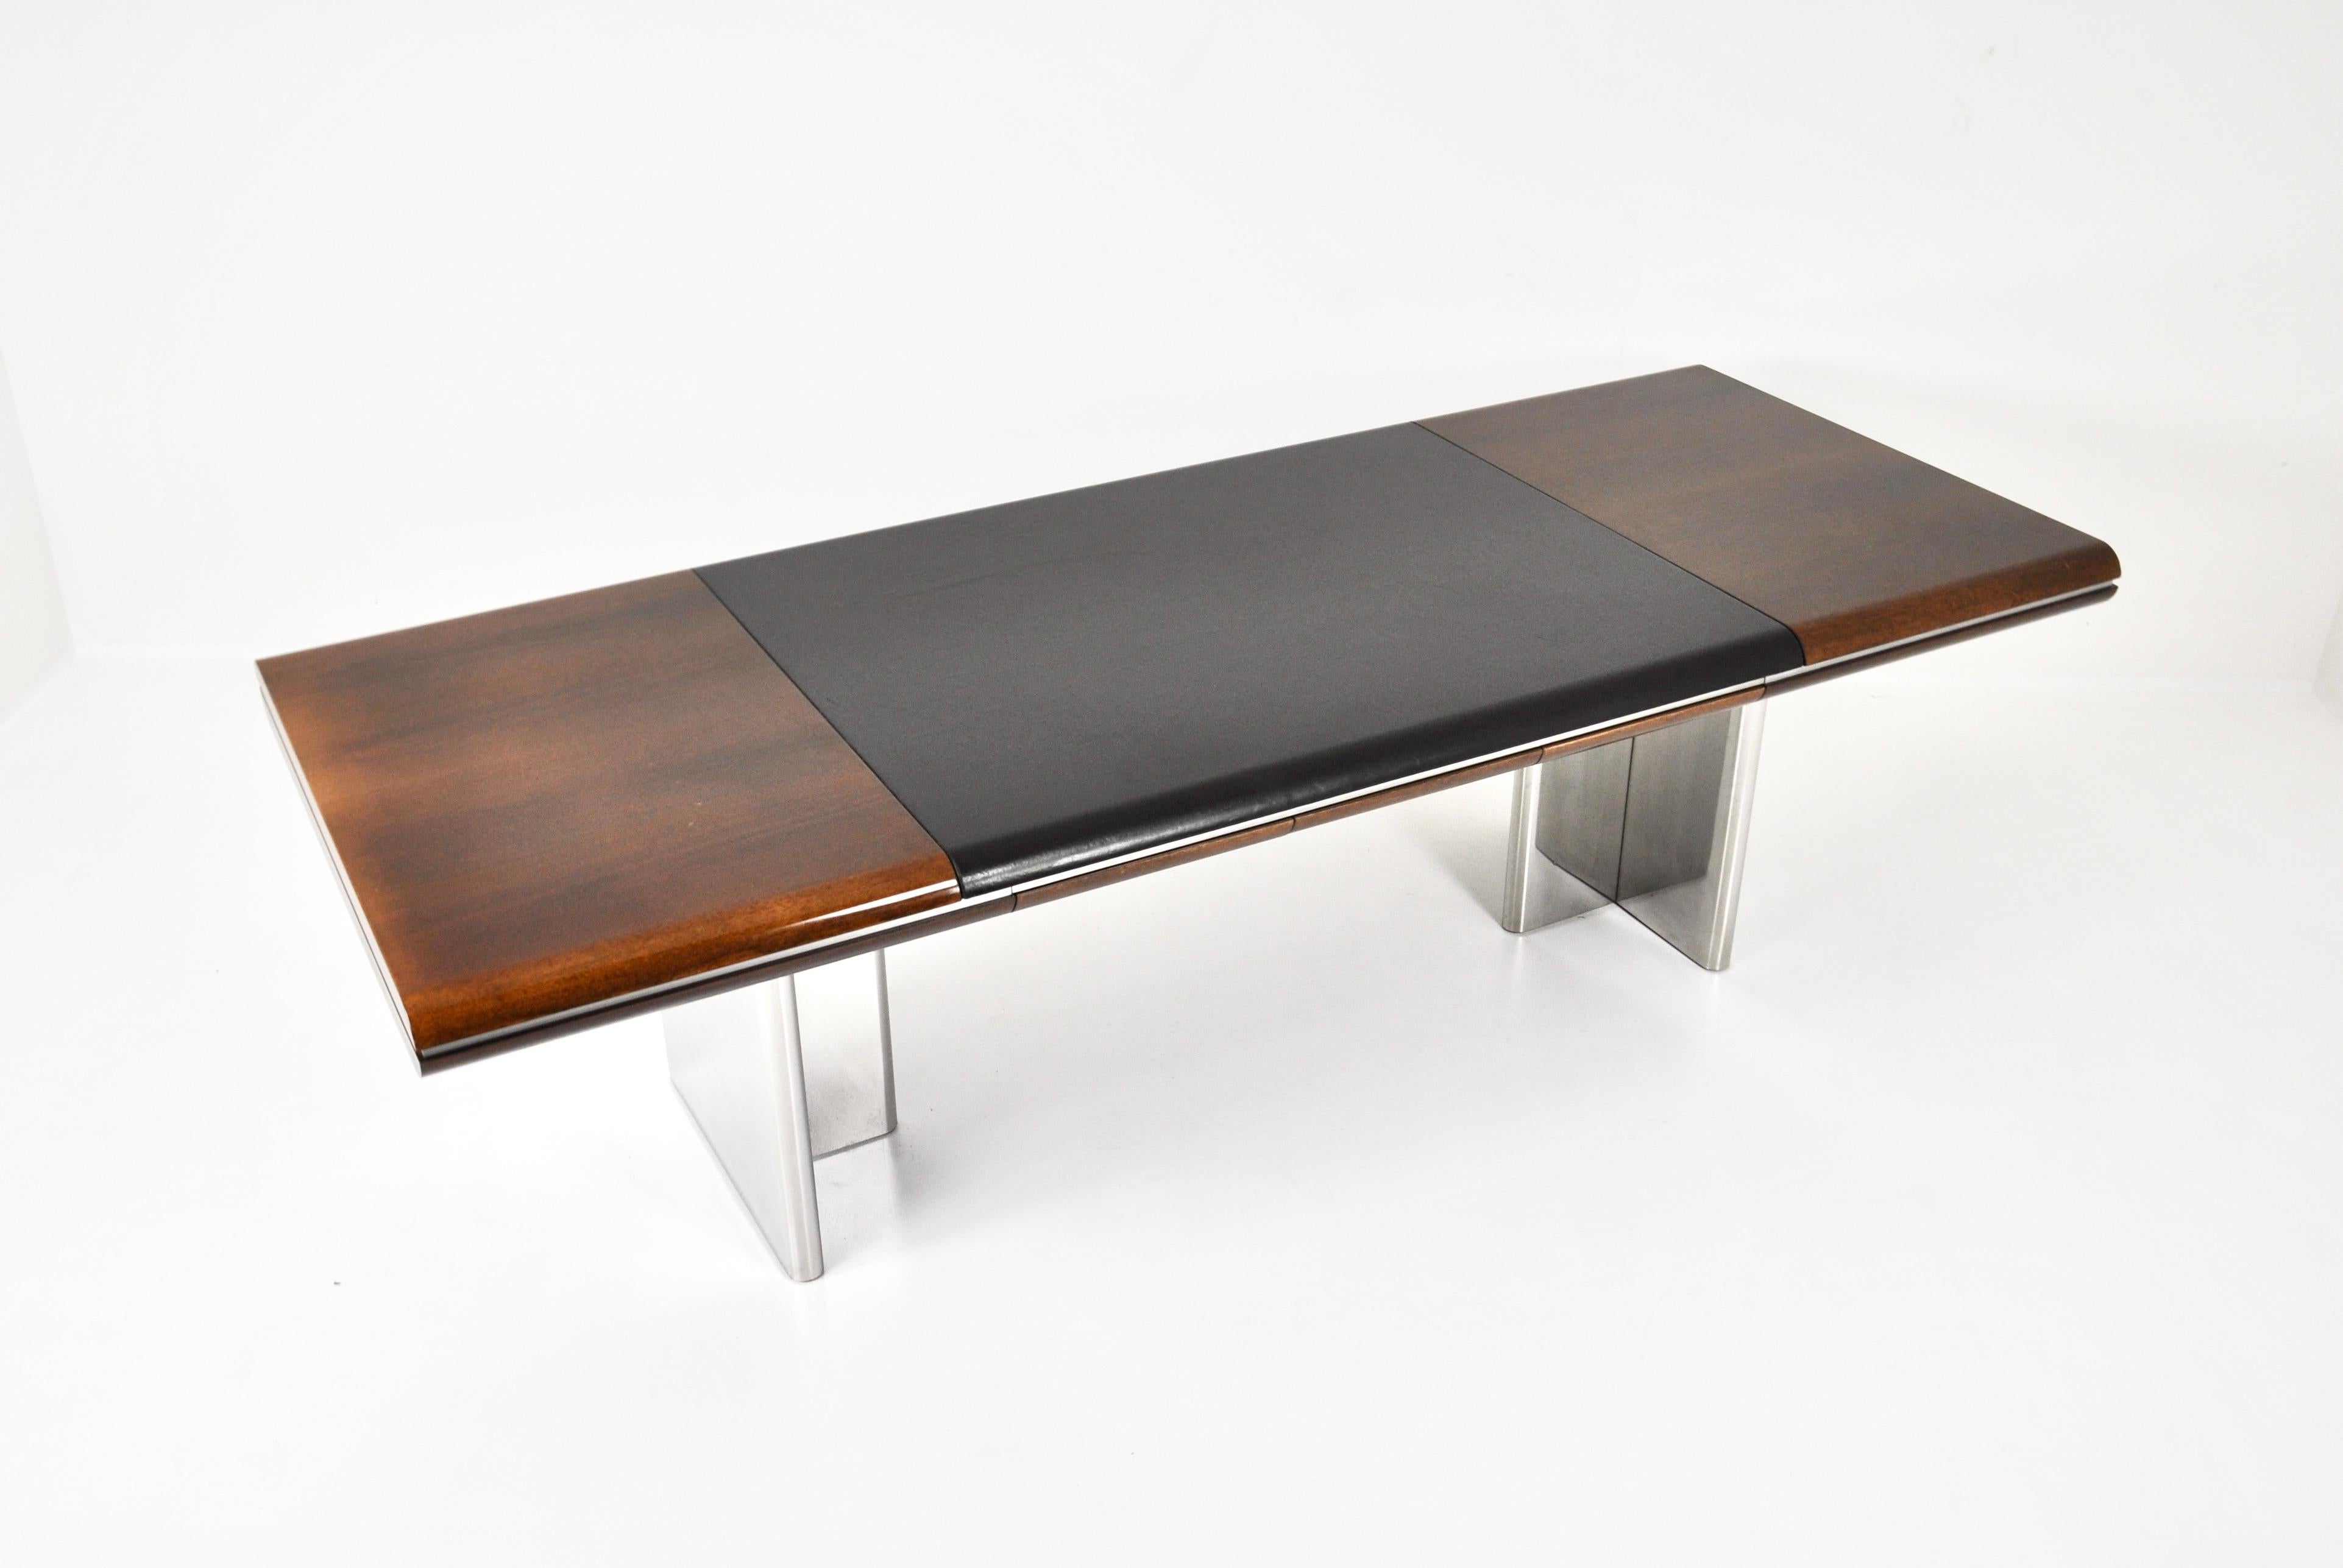 Large Italian Desk by Hans von Klier for Skipper, 1970s In Good Condition For Sale In Lasne, BE